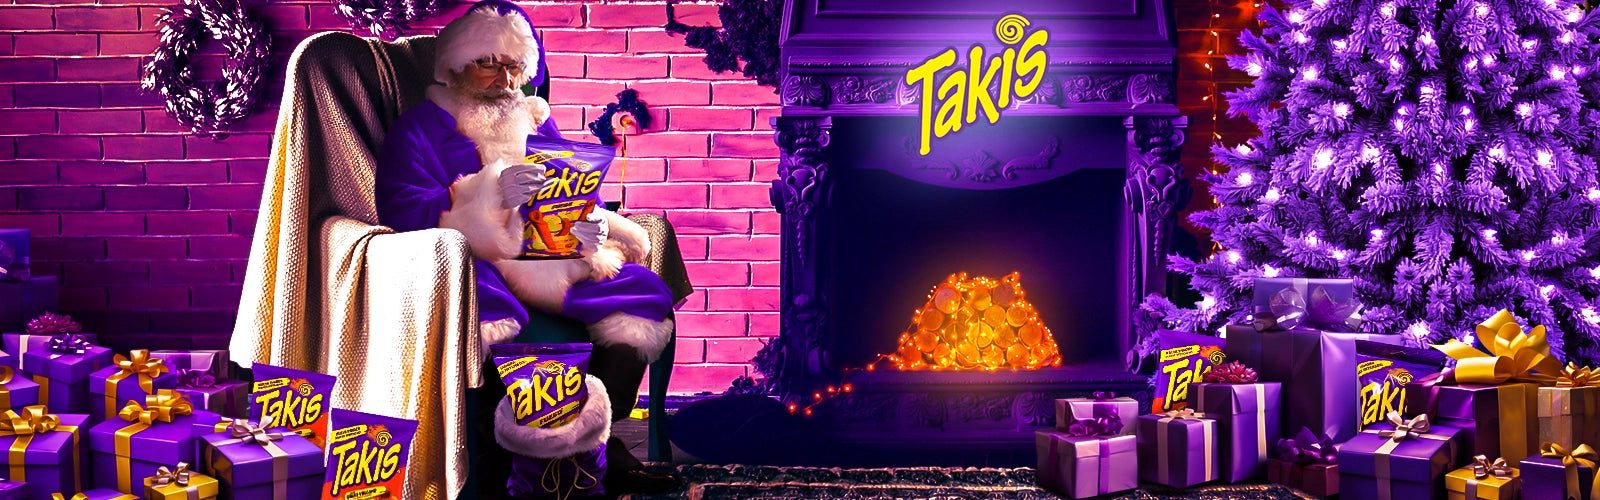 Takis collection banner